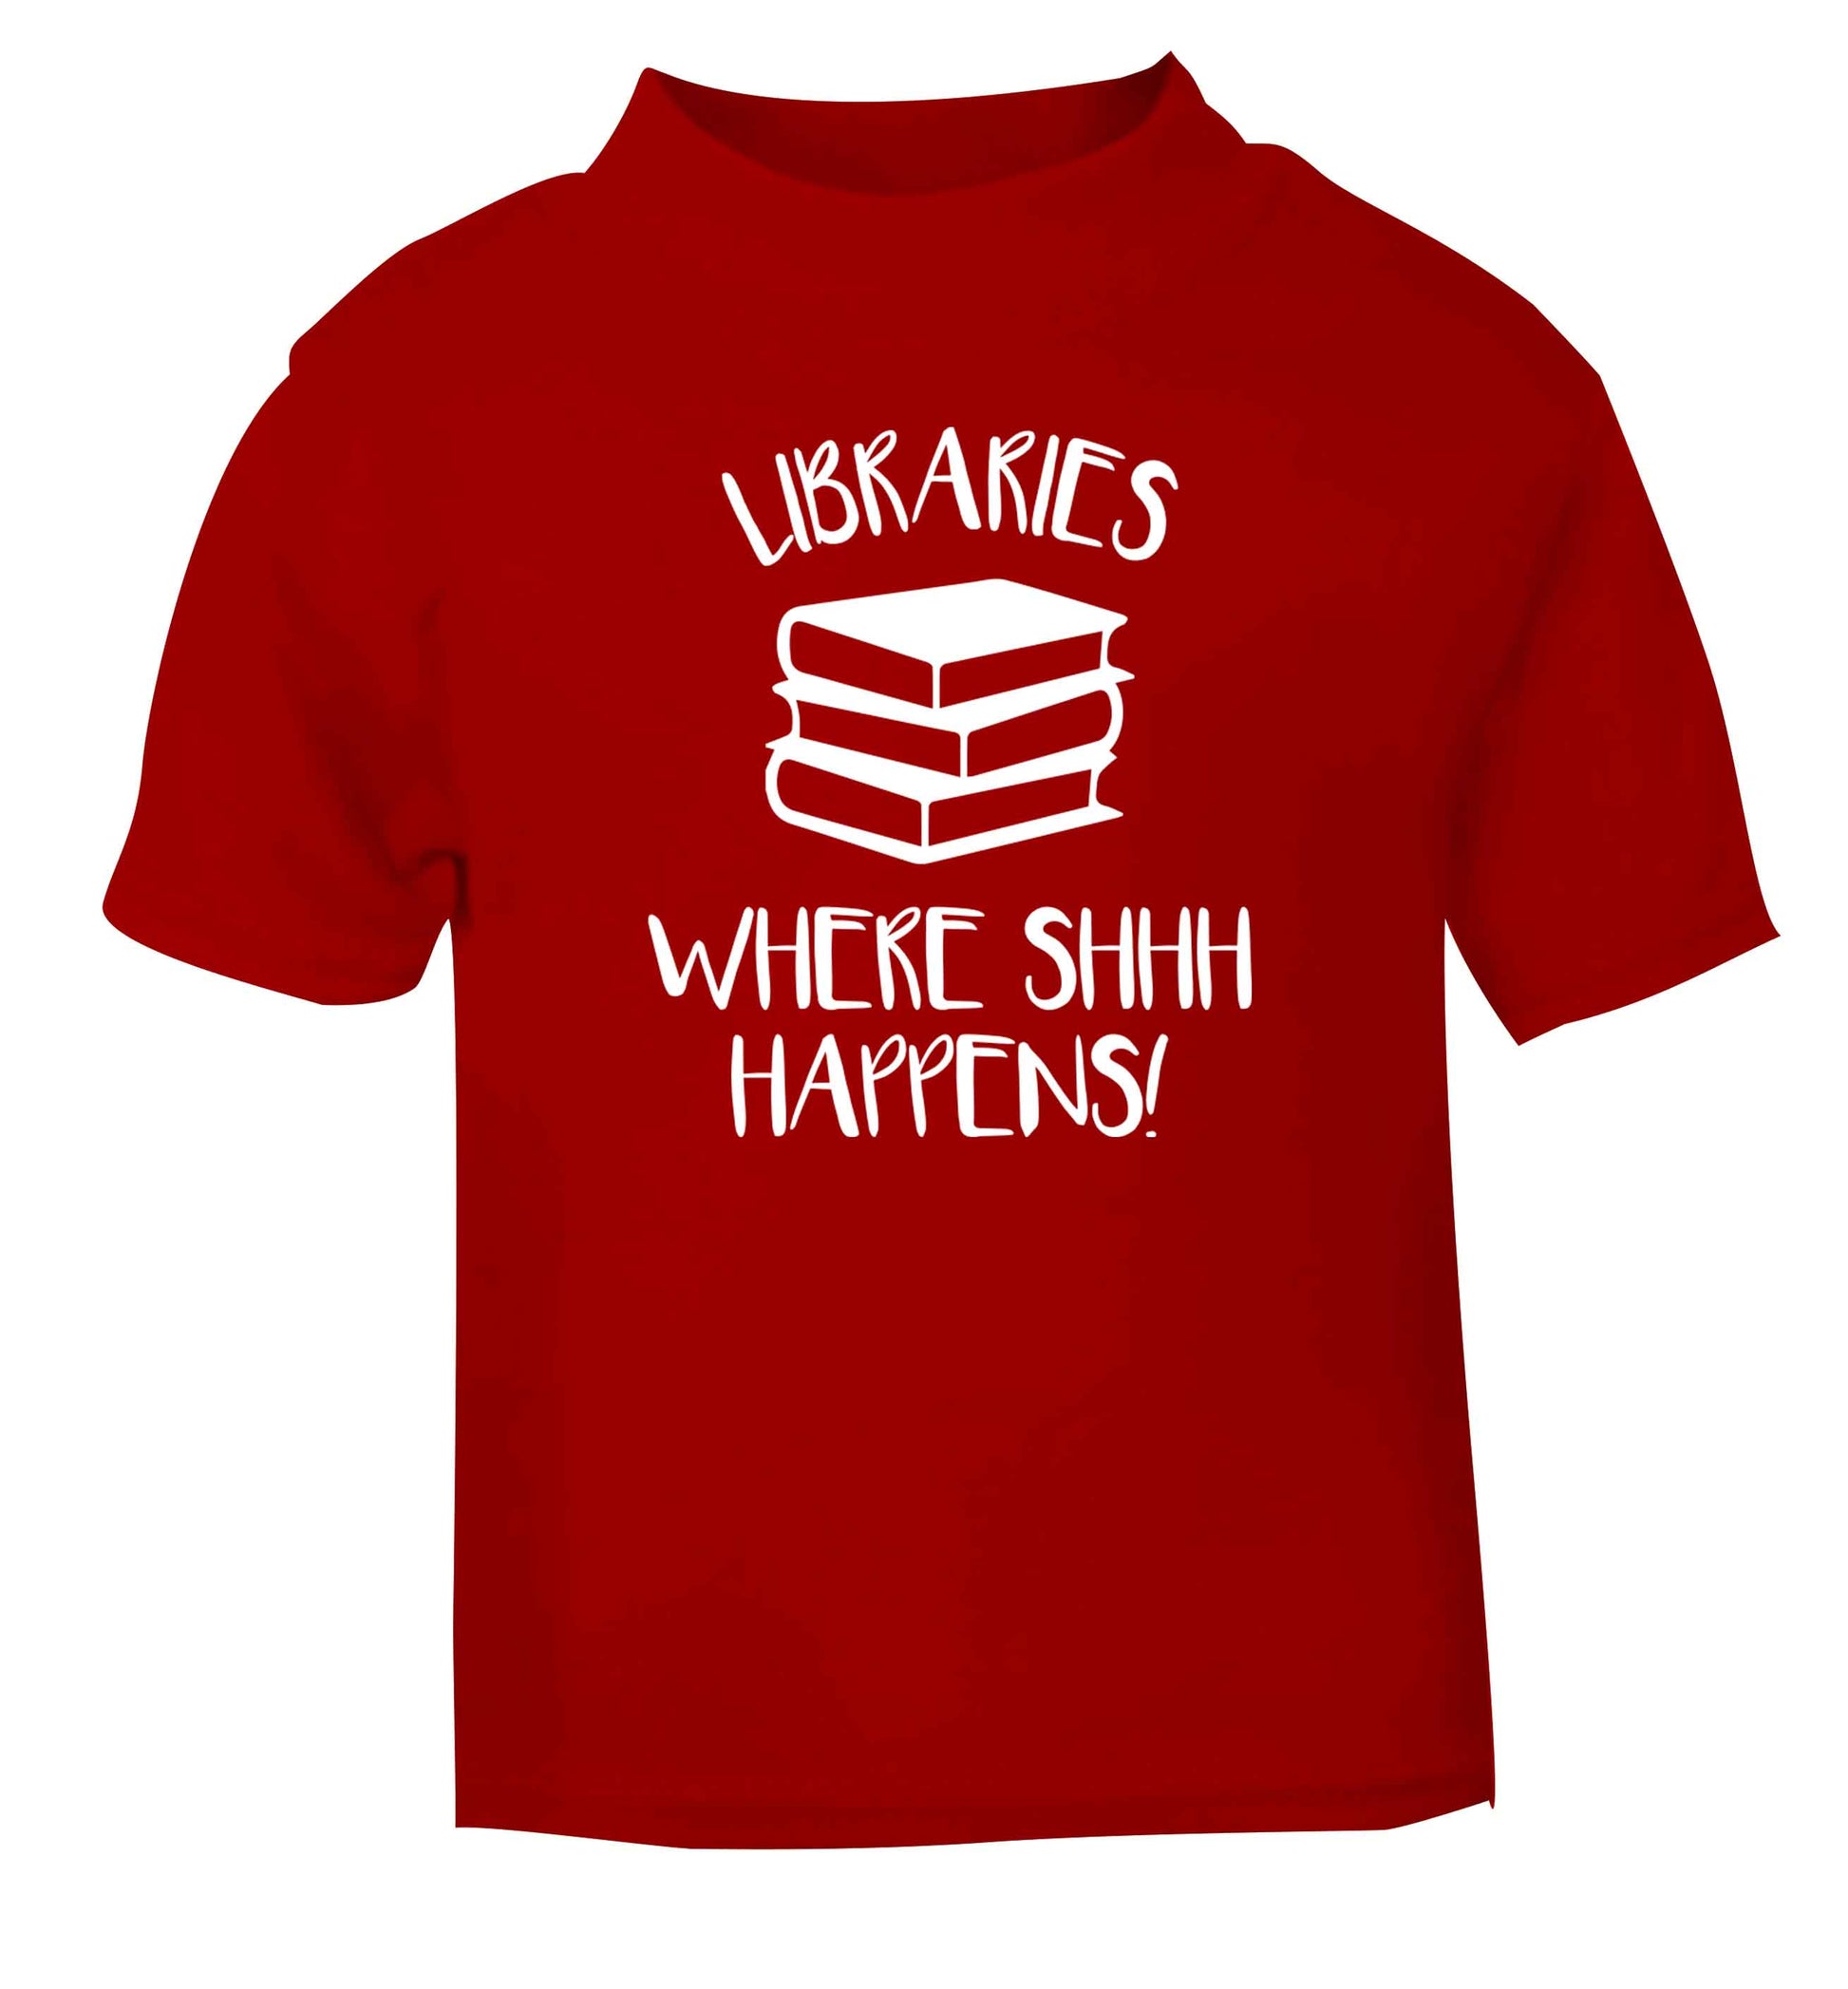 Libraries where shh happens! red Baby Toddler Tshirt 2 Years